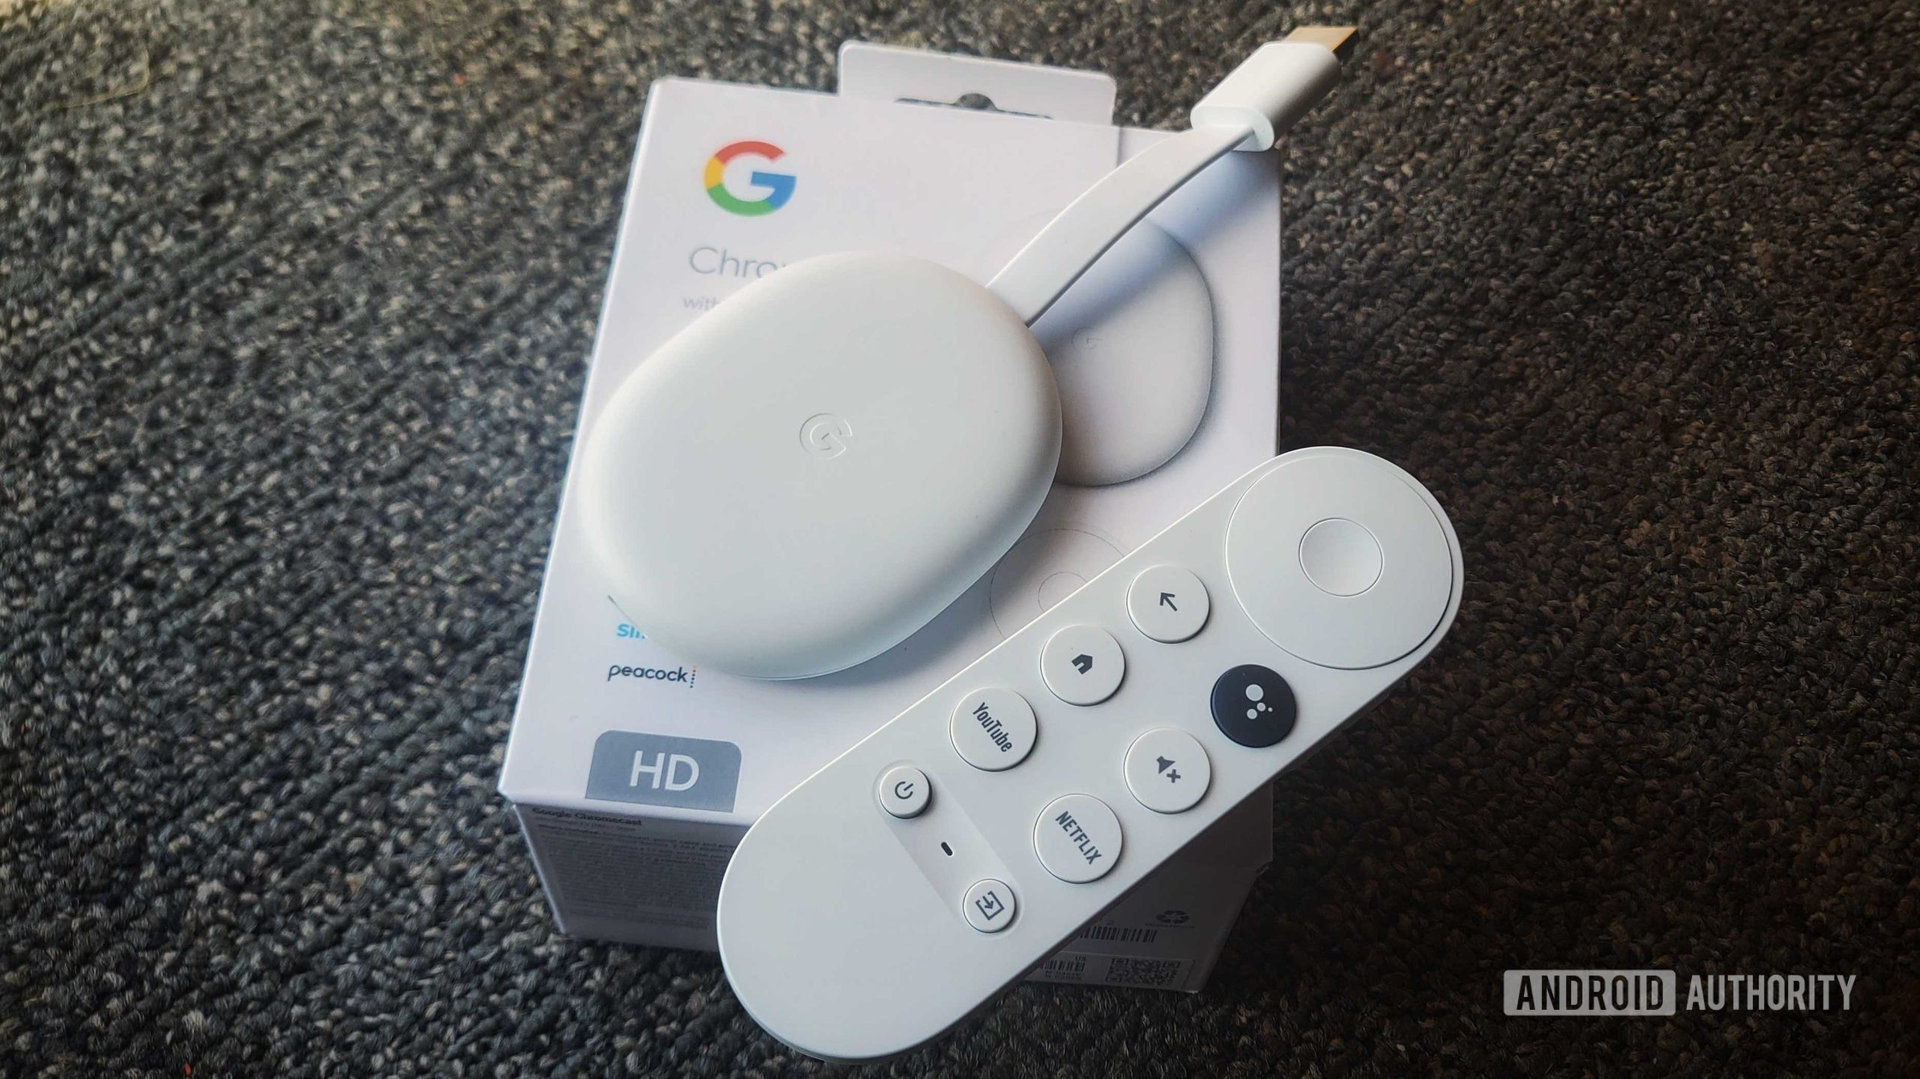 chromecast with google tv hd box, remote, and dongle